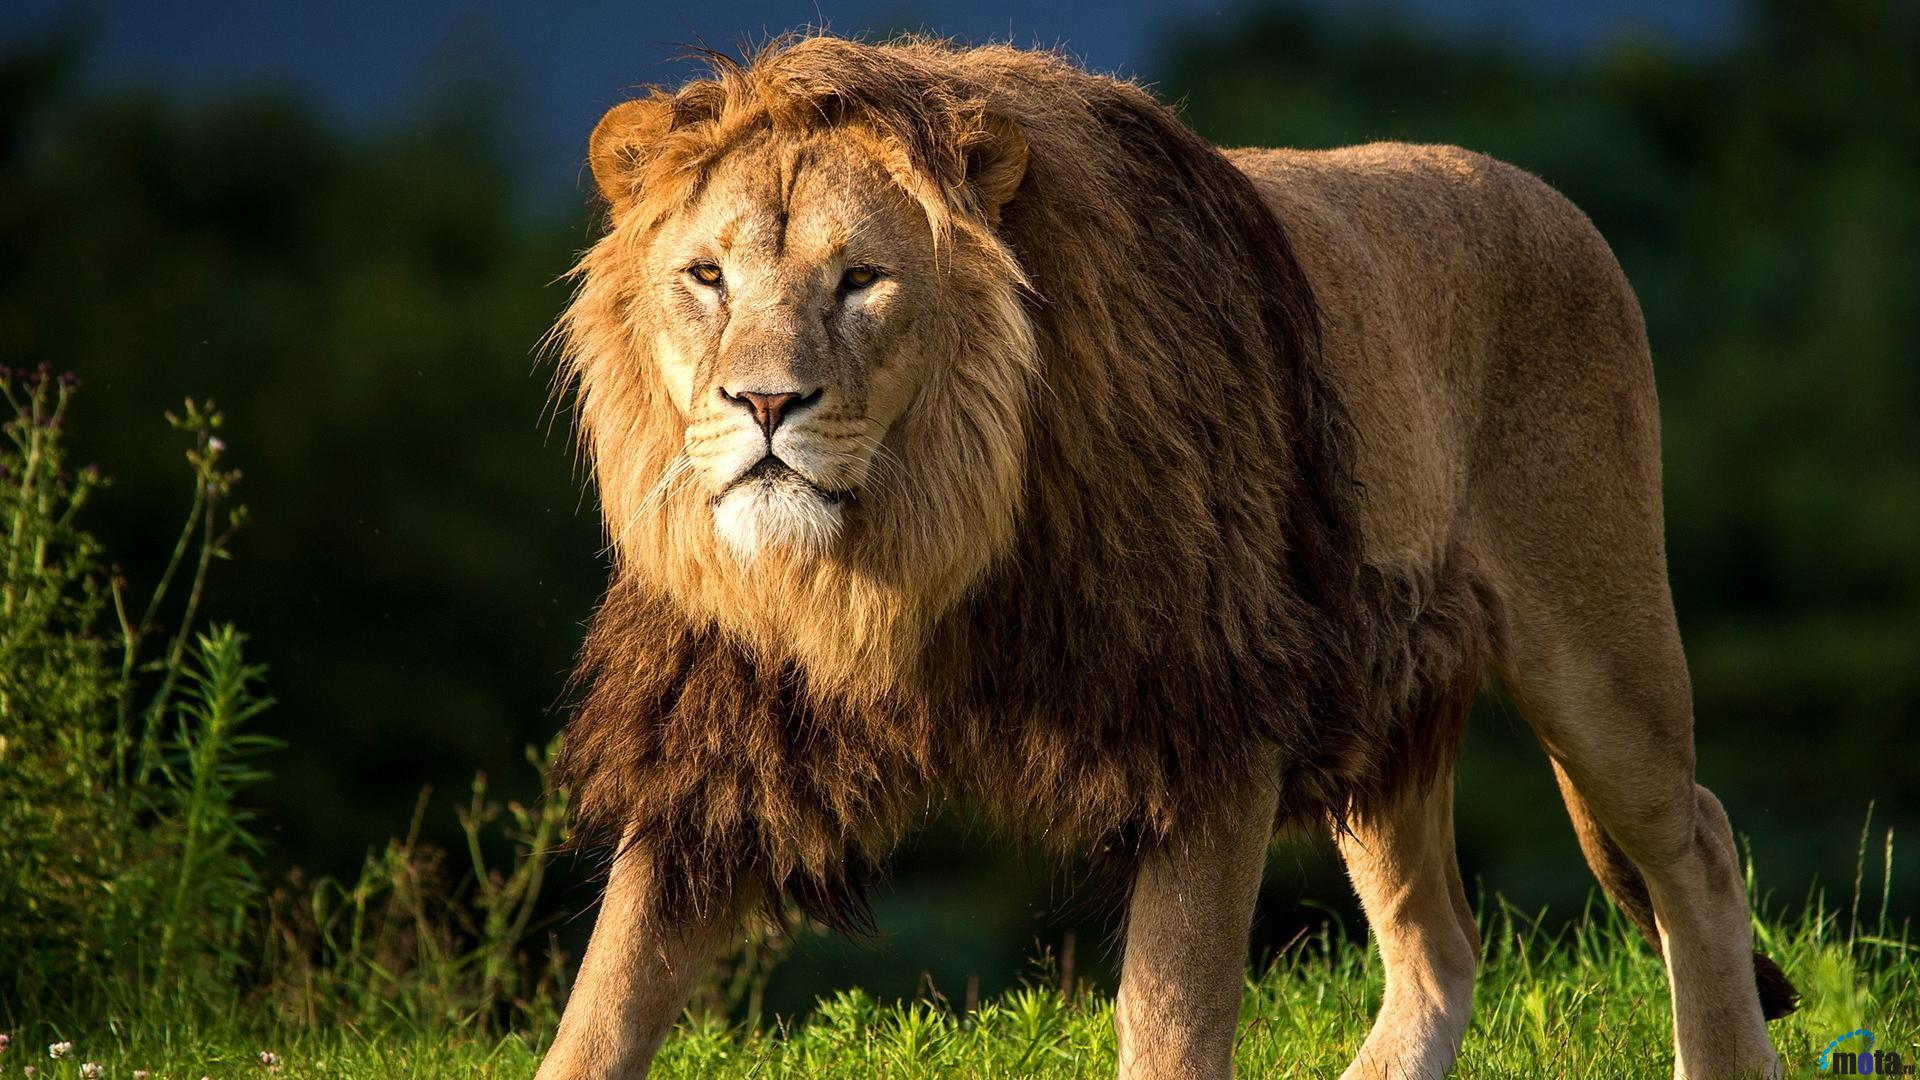 Lion Image Hd Group with 62 items